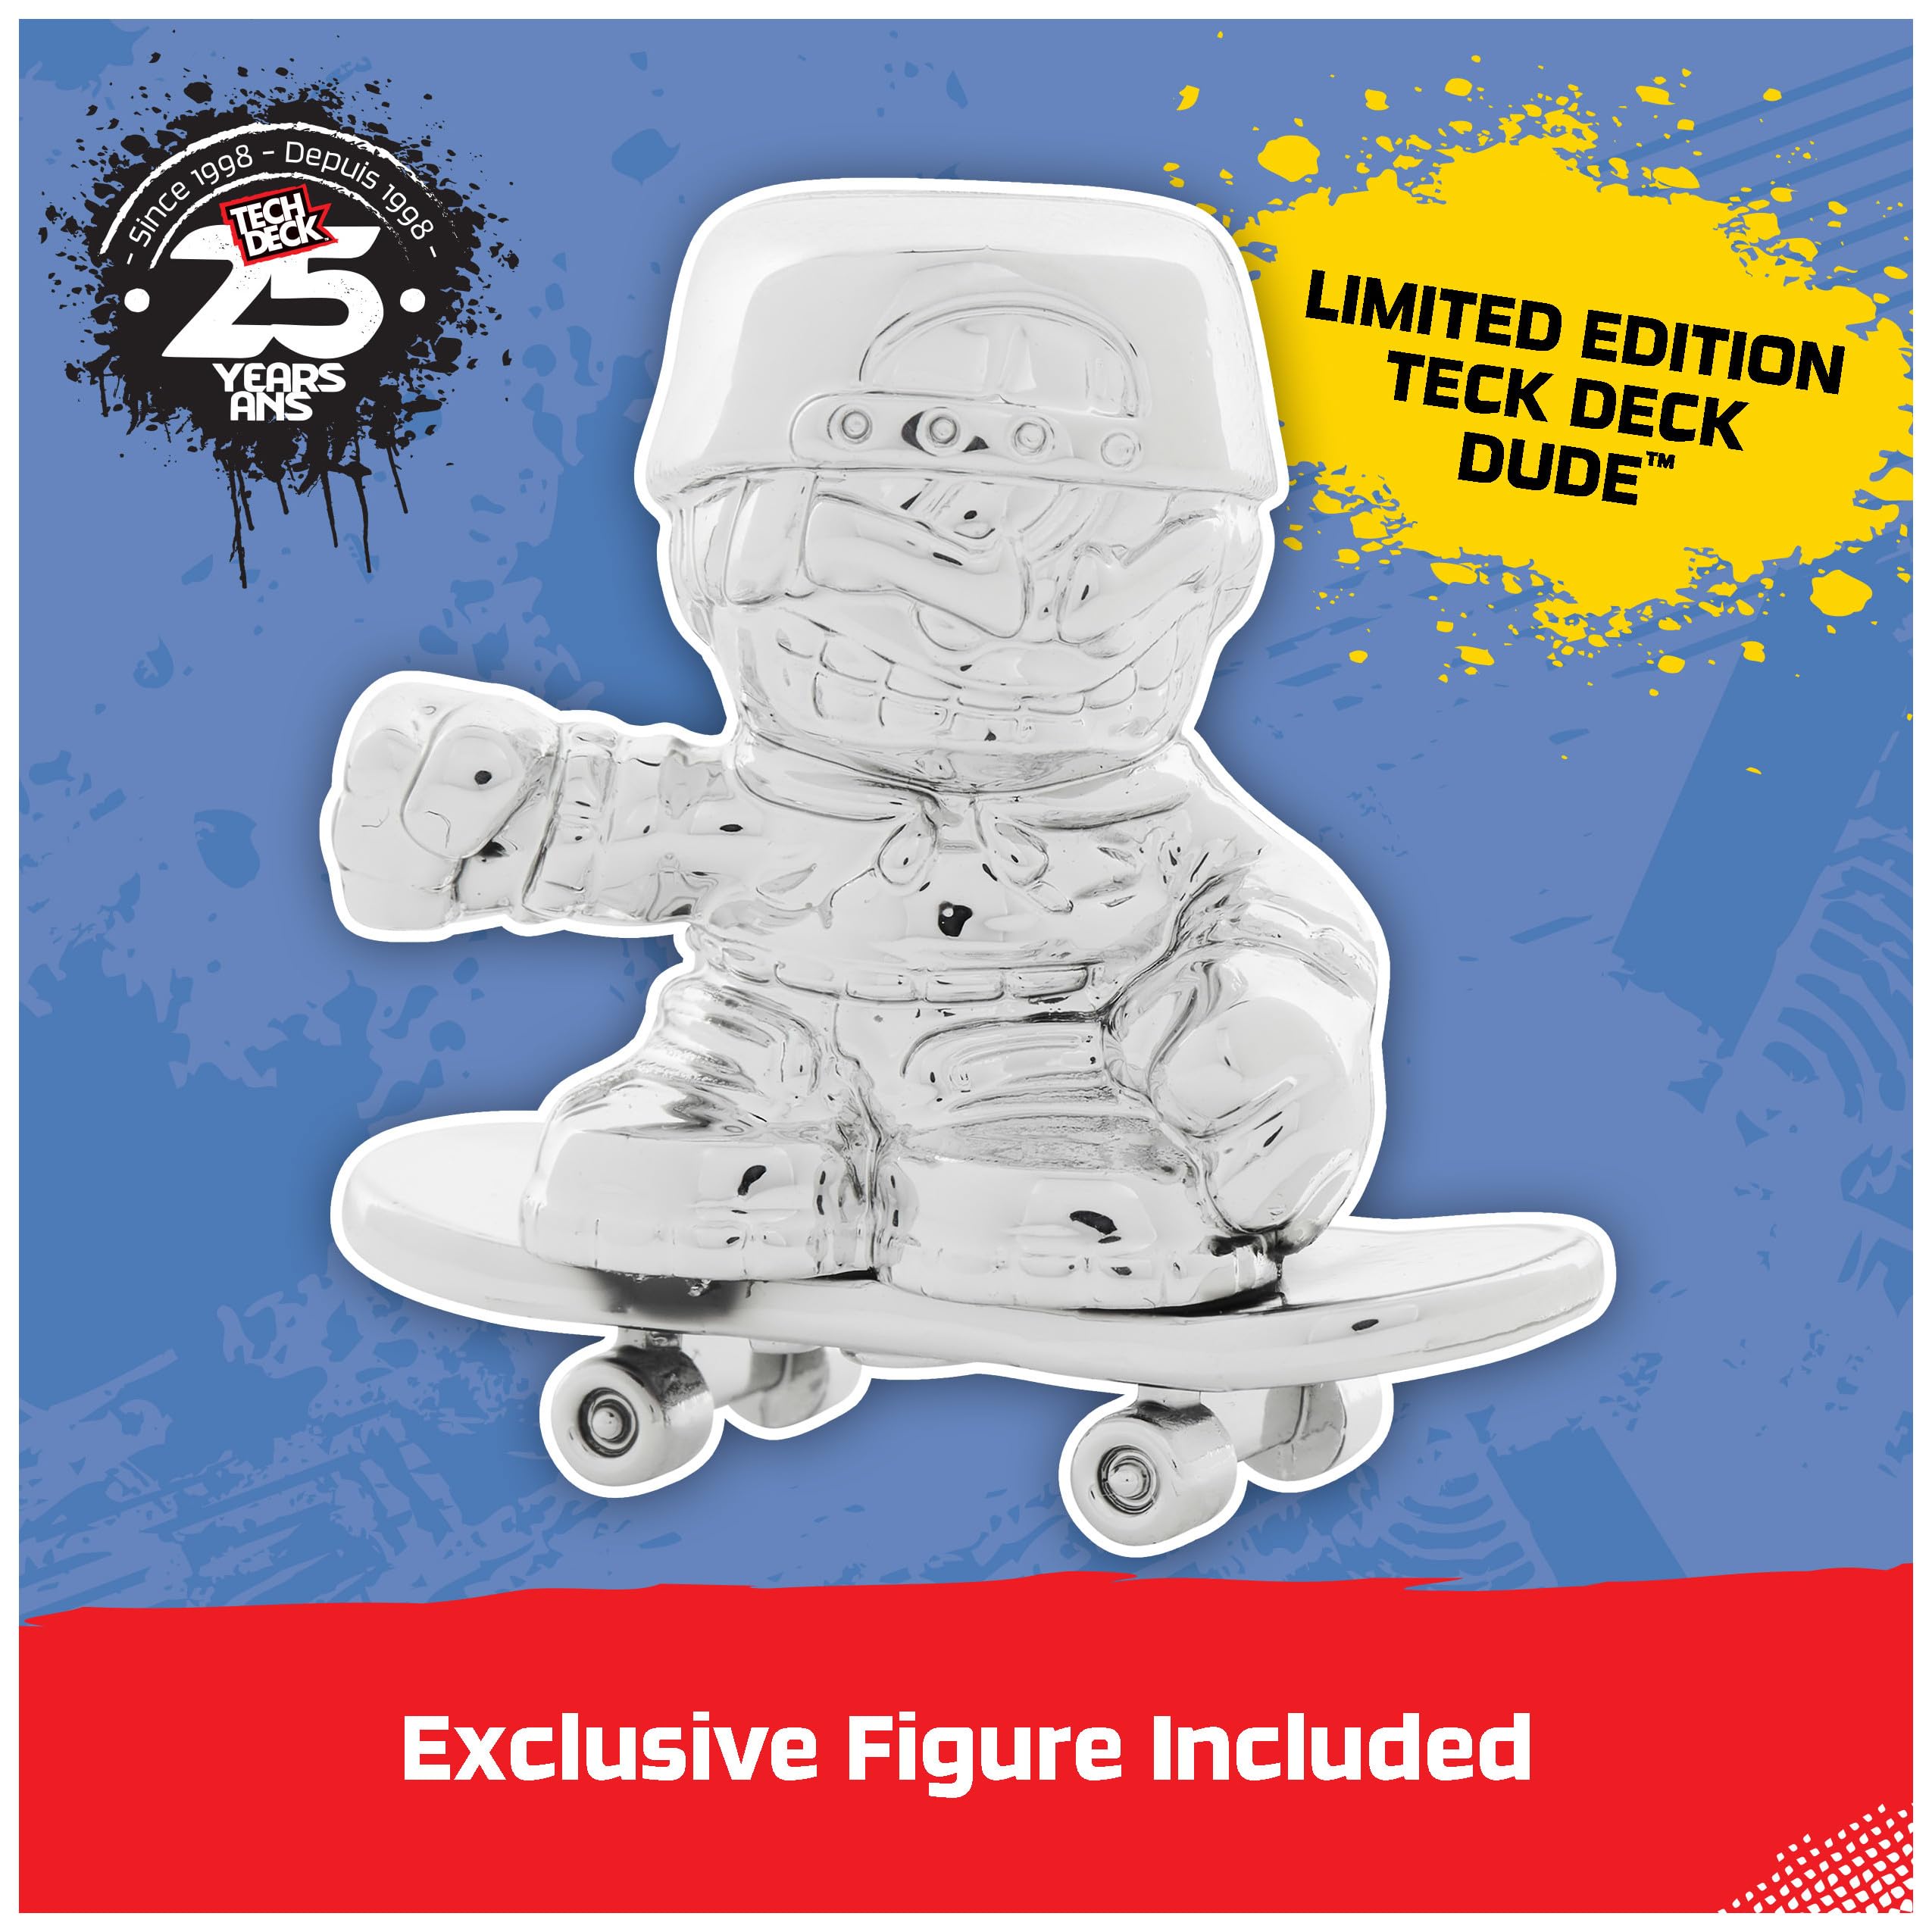 TECH DECK, 25th Anniversary 8-Pack Fingerboards with Exclusive Figure, Collectible and Customizable Mini Skateboards, Kids Toys for Ages 6 and up